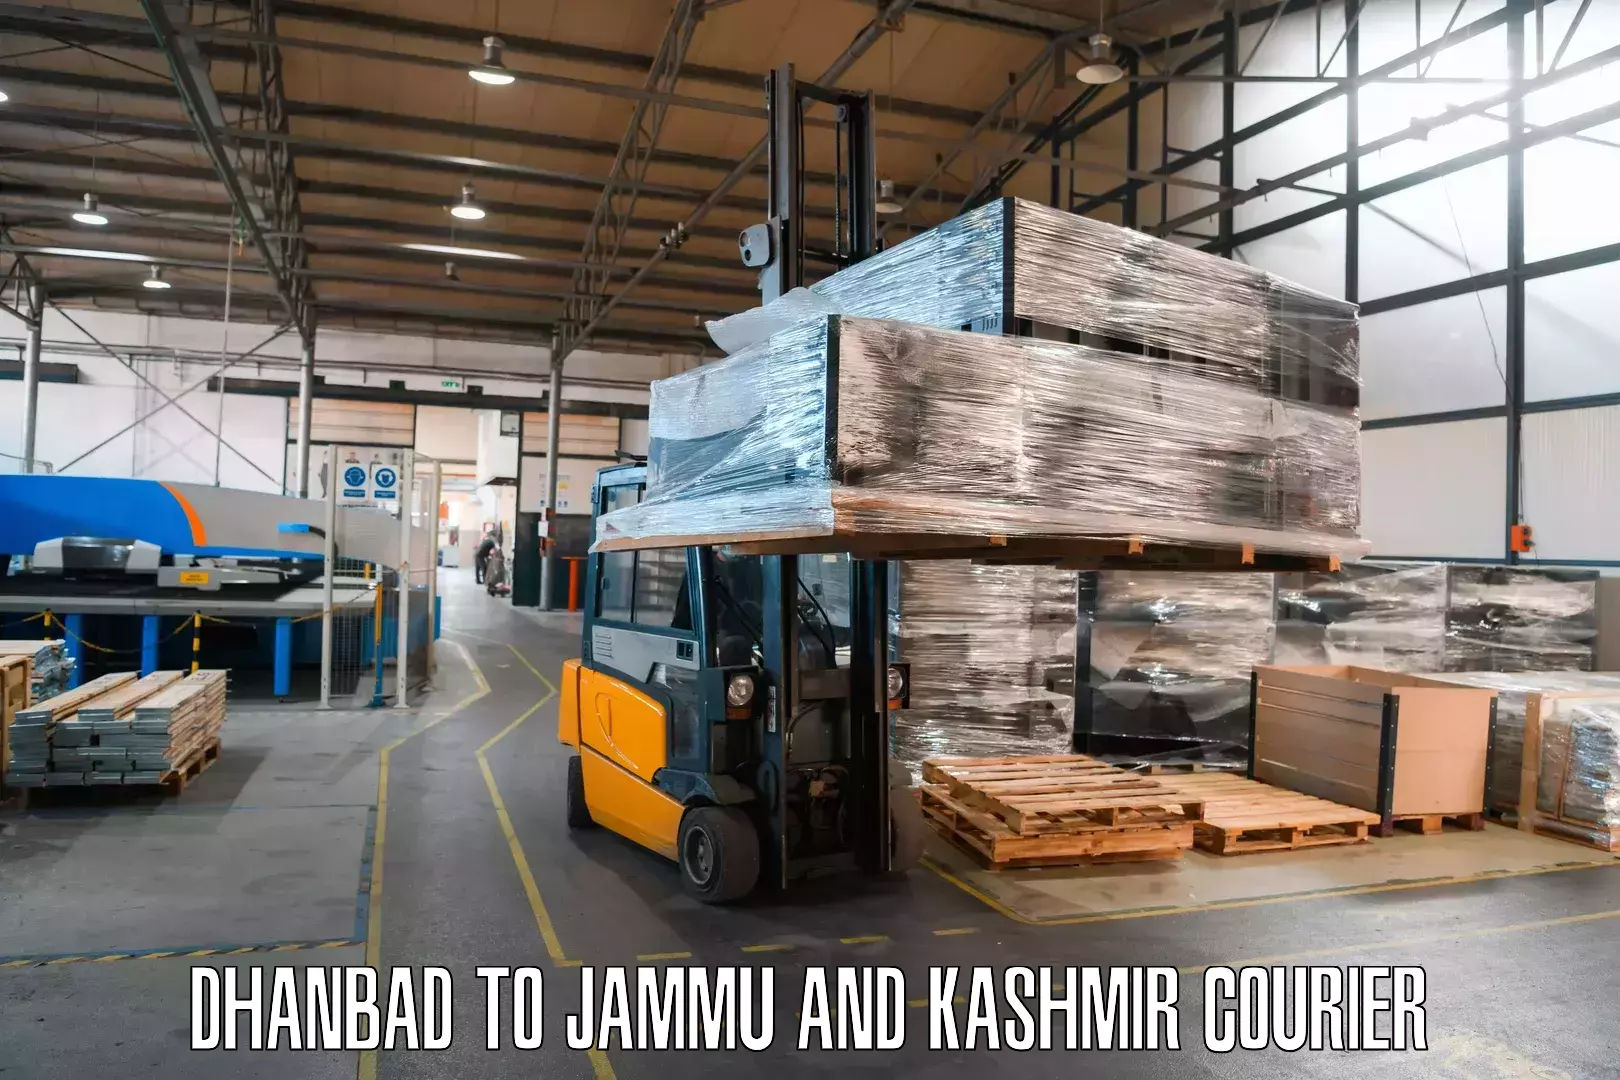 24-hour courier service Dhanbad to Jammu and Kashmir